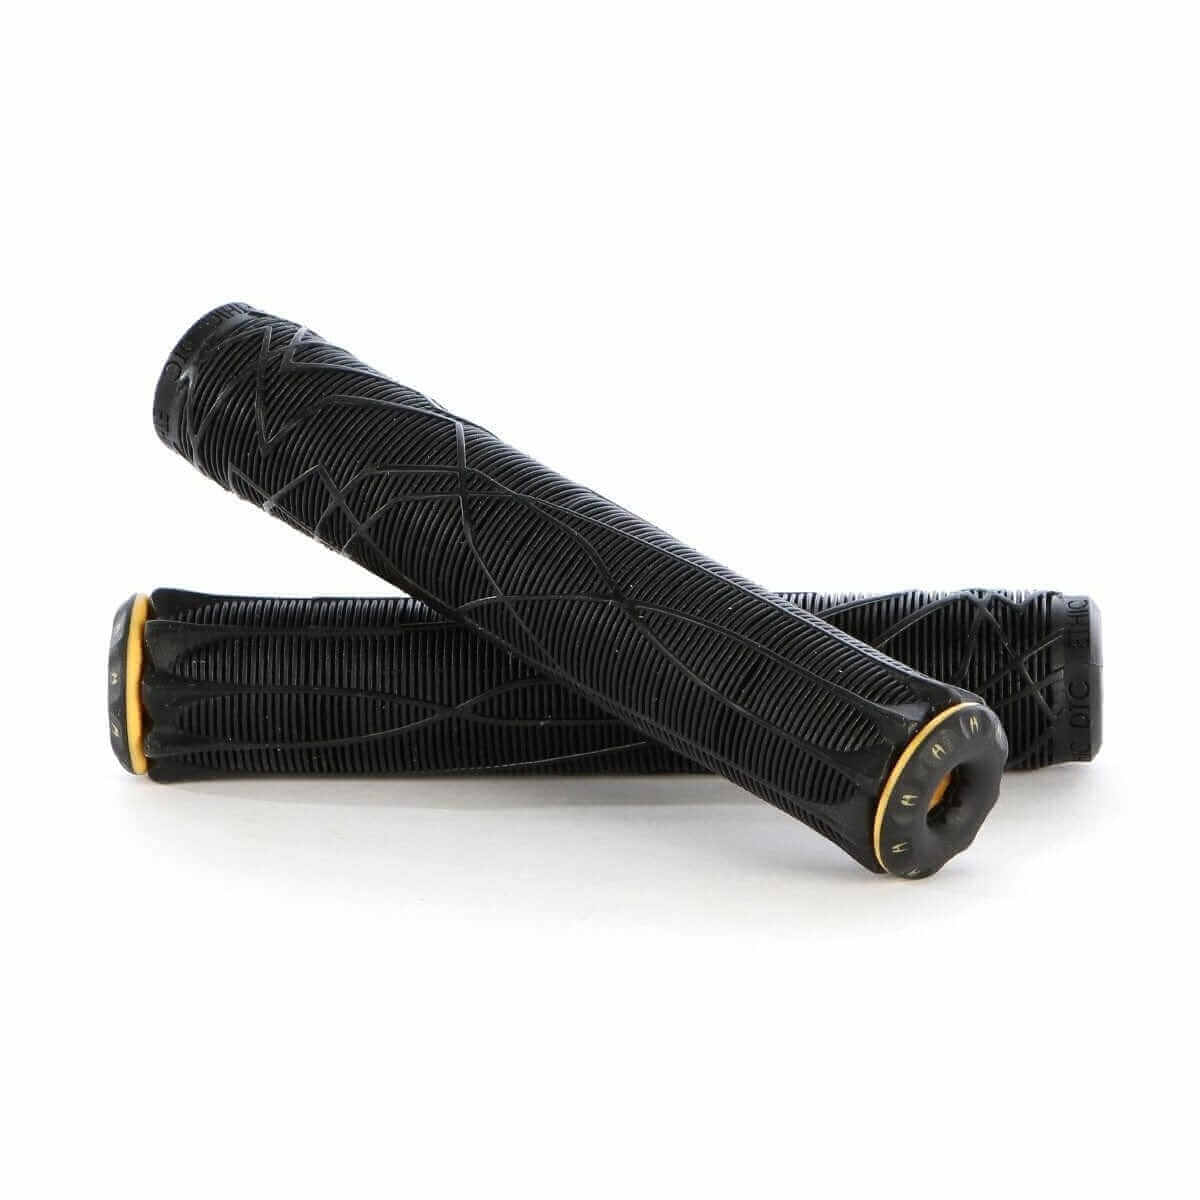 Ethic DTC Rubber Grips - TSP The Shop